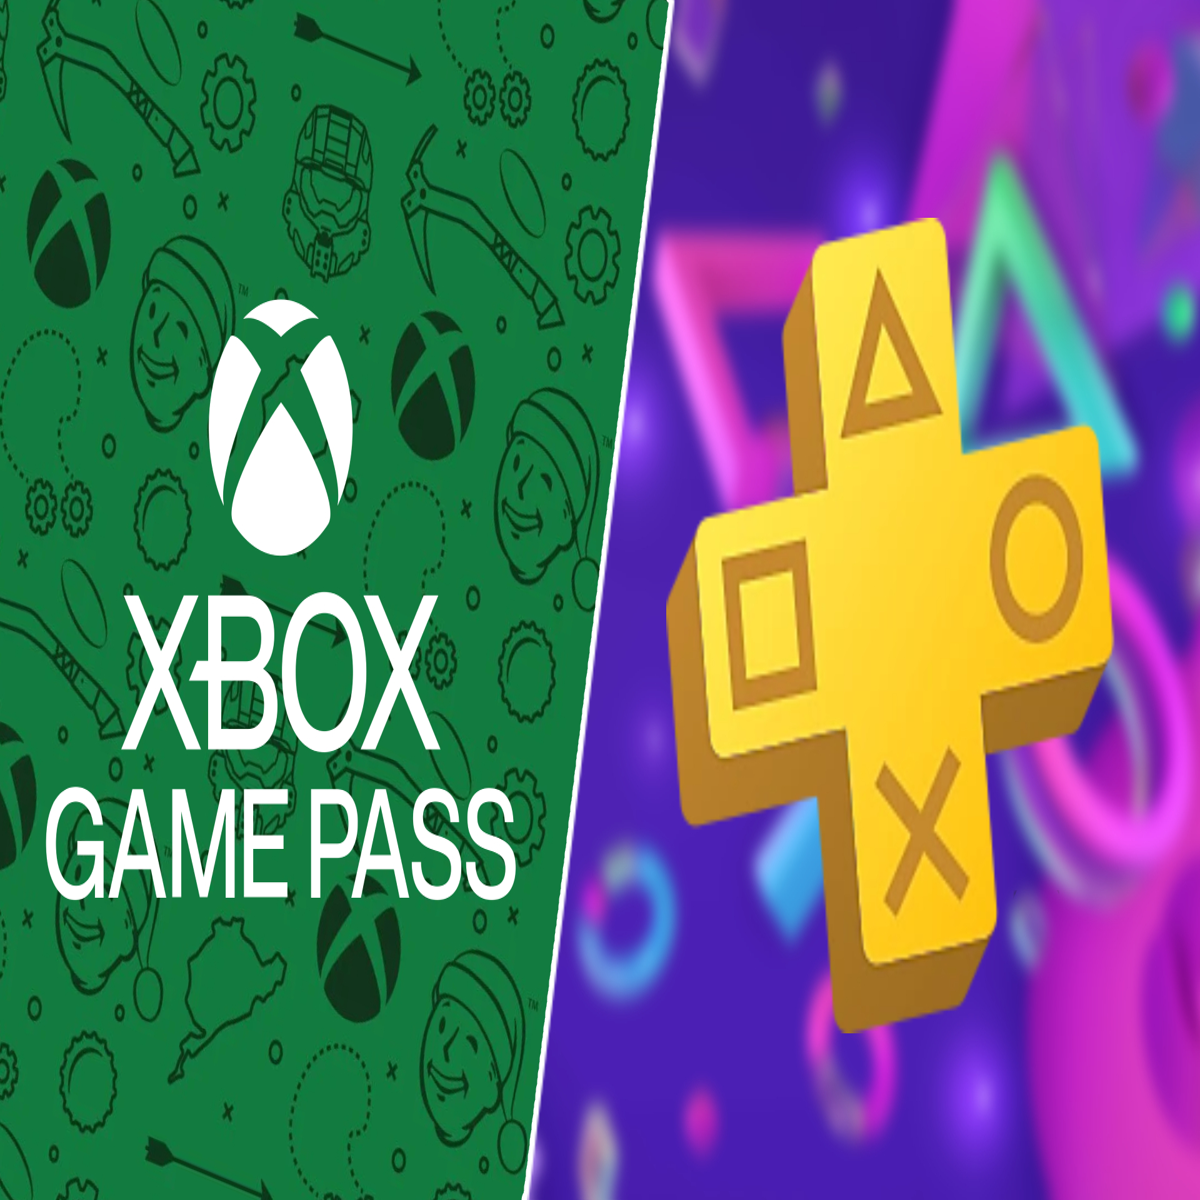 Sony just did a better job of convincing me Xbox Game Pass is